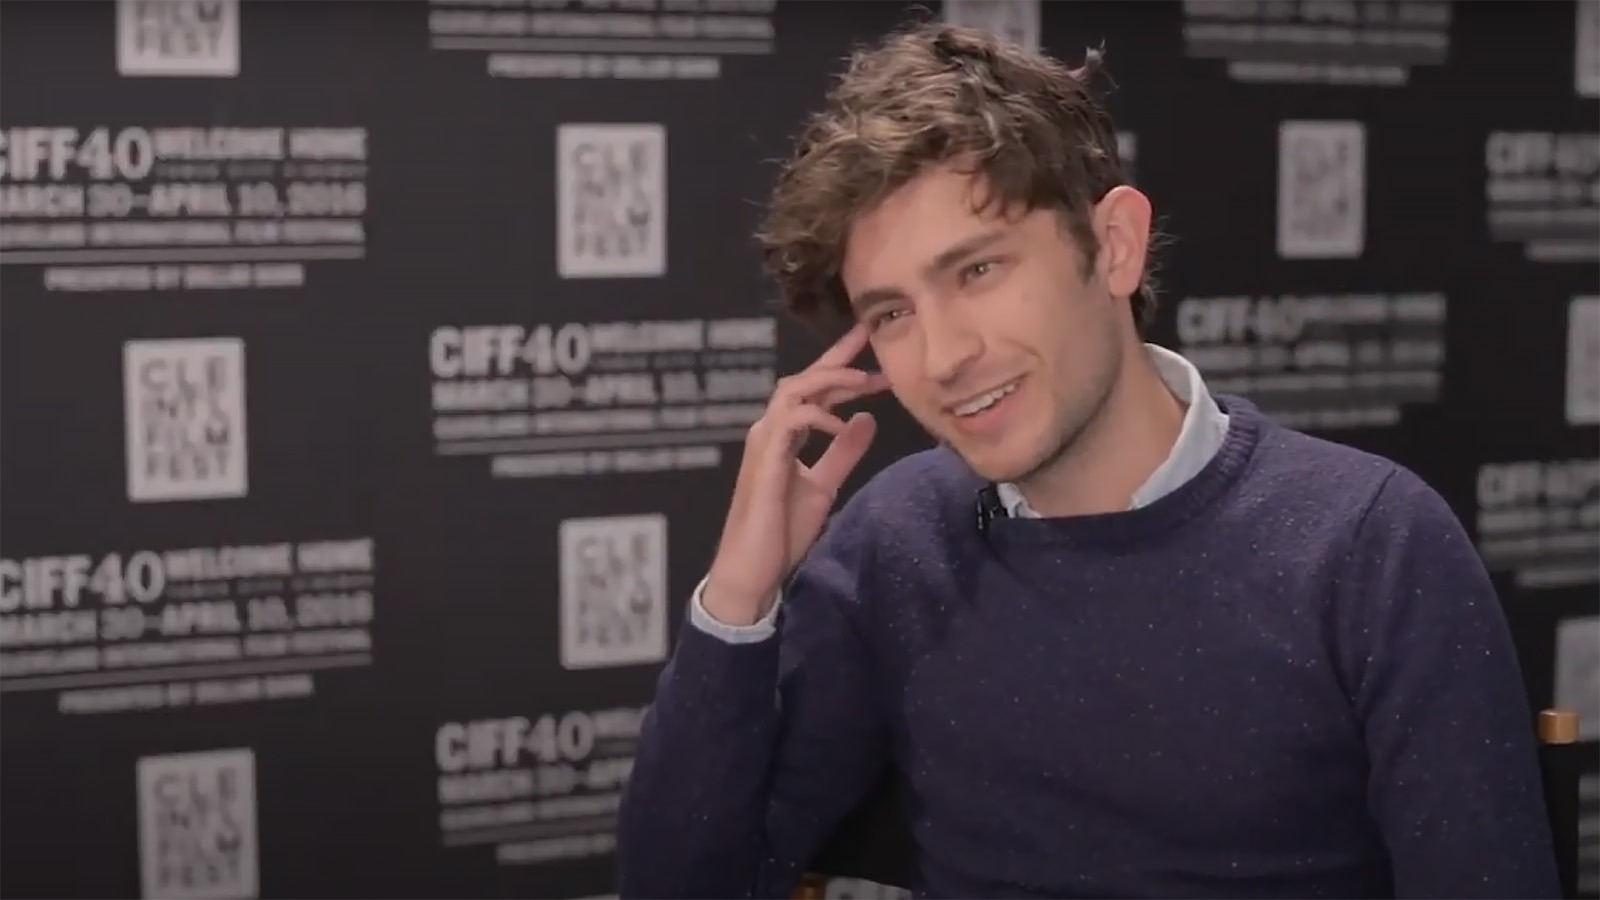 Editor Harrison Atkins being interviewed for CIFF40 in 2016.